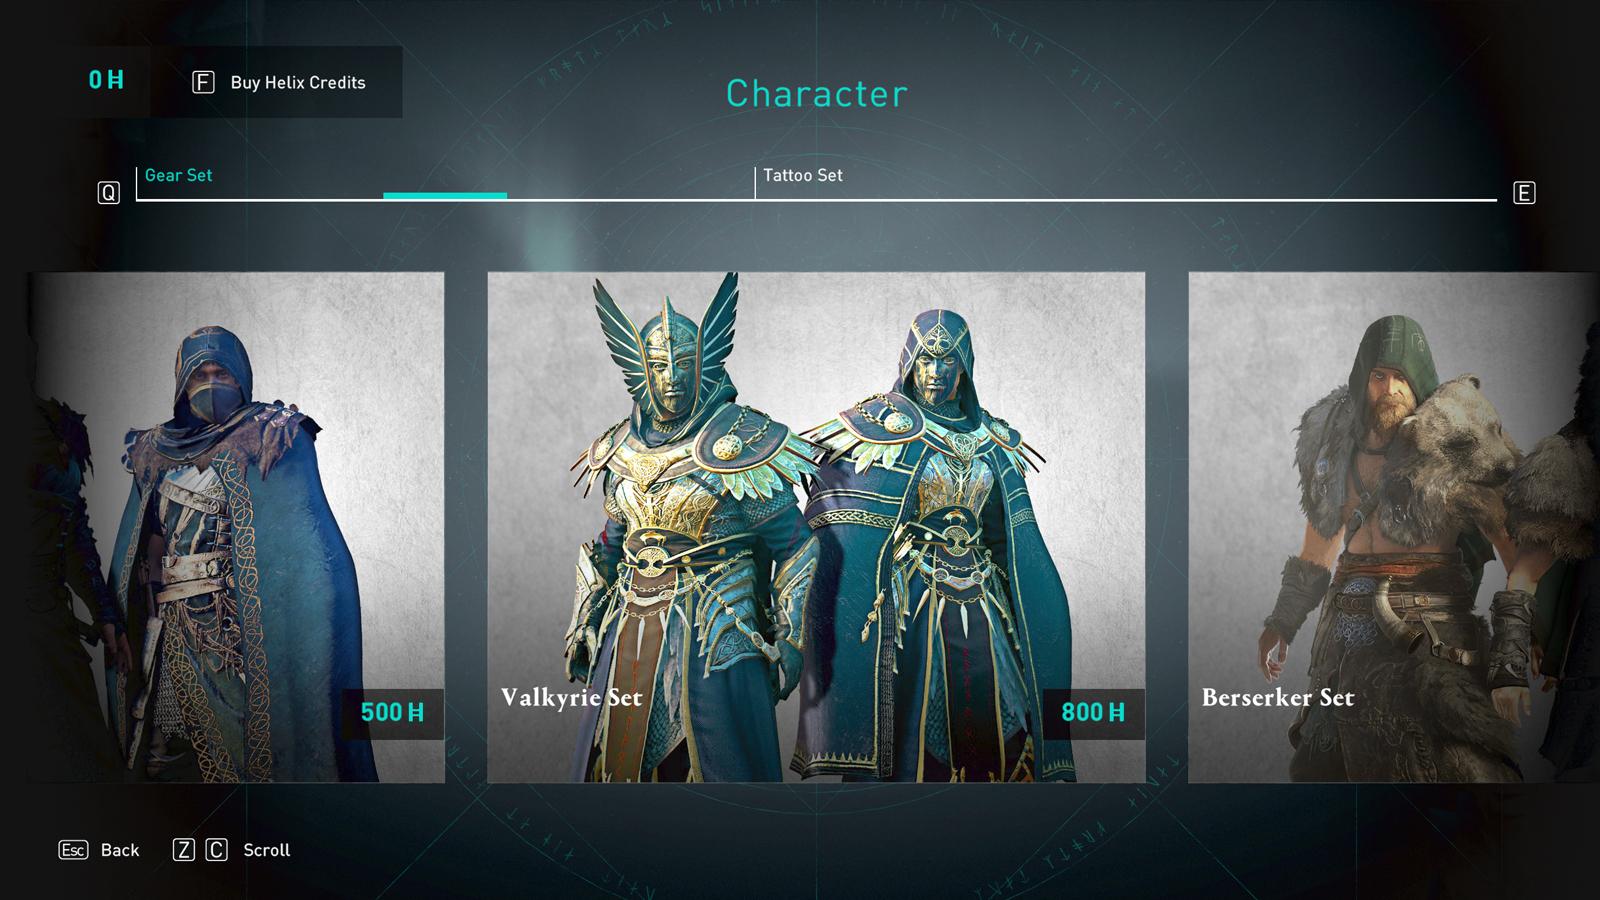 Valhalla Valkyrie set in the item store